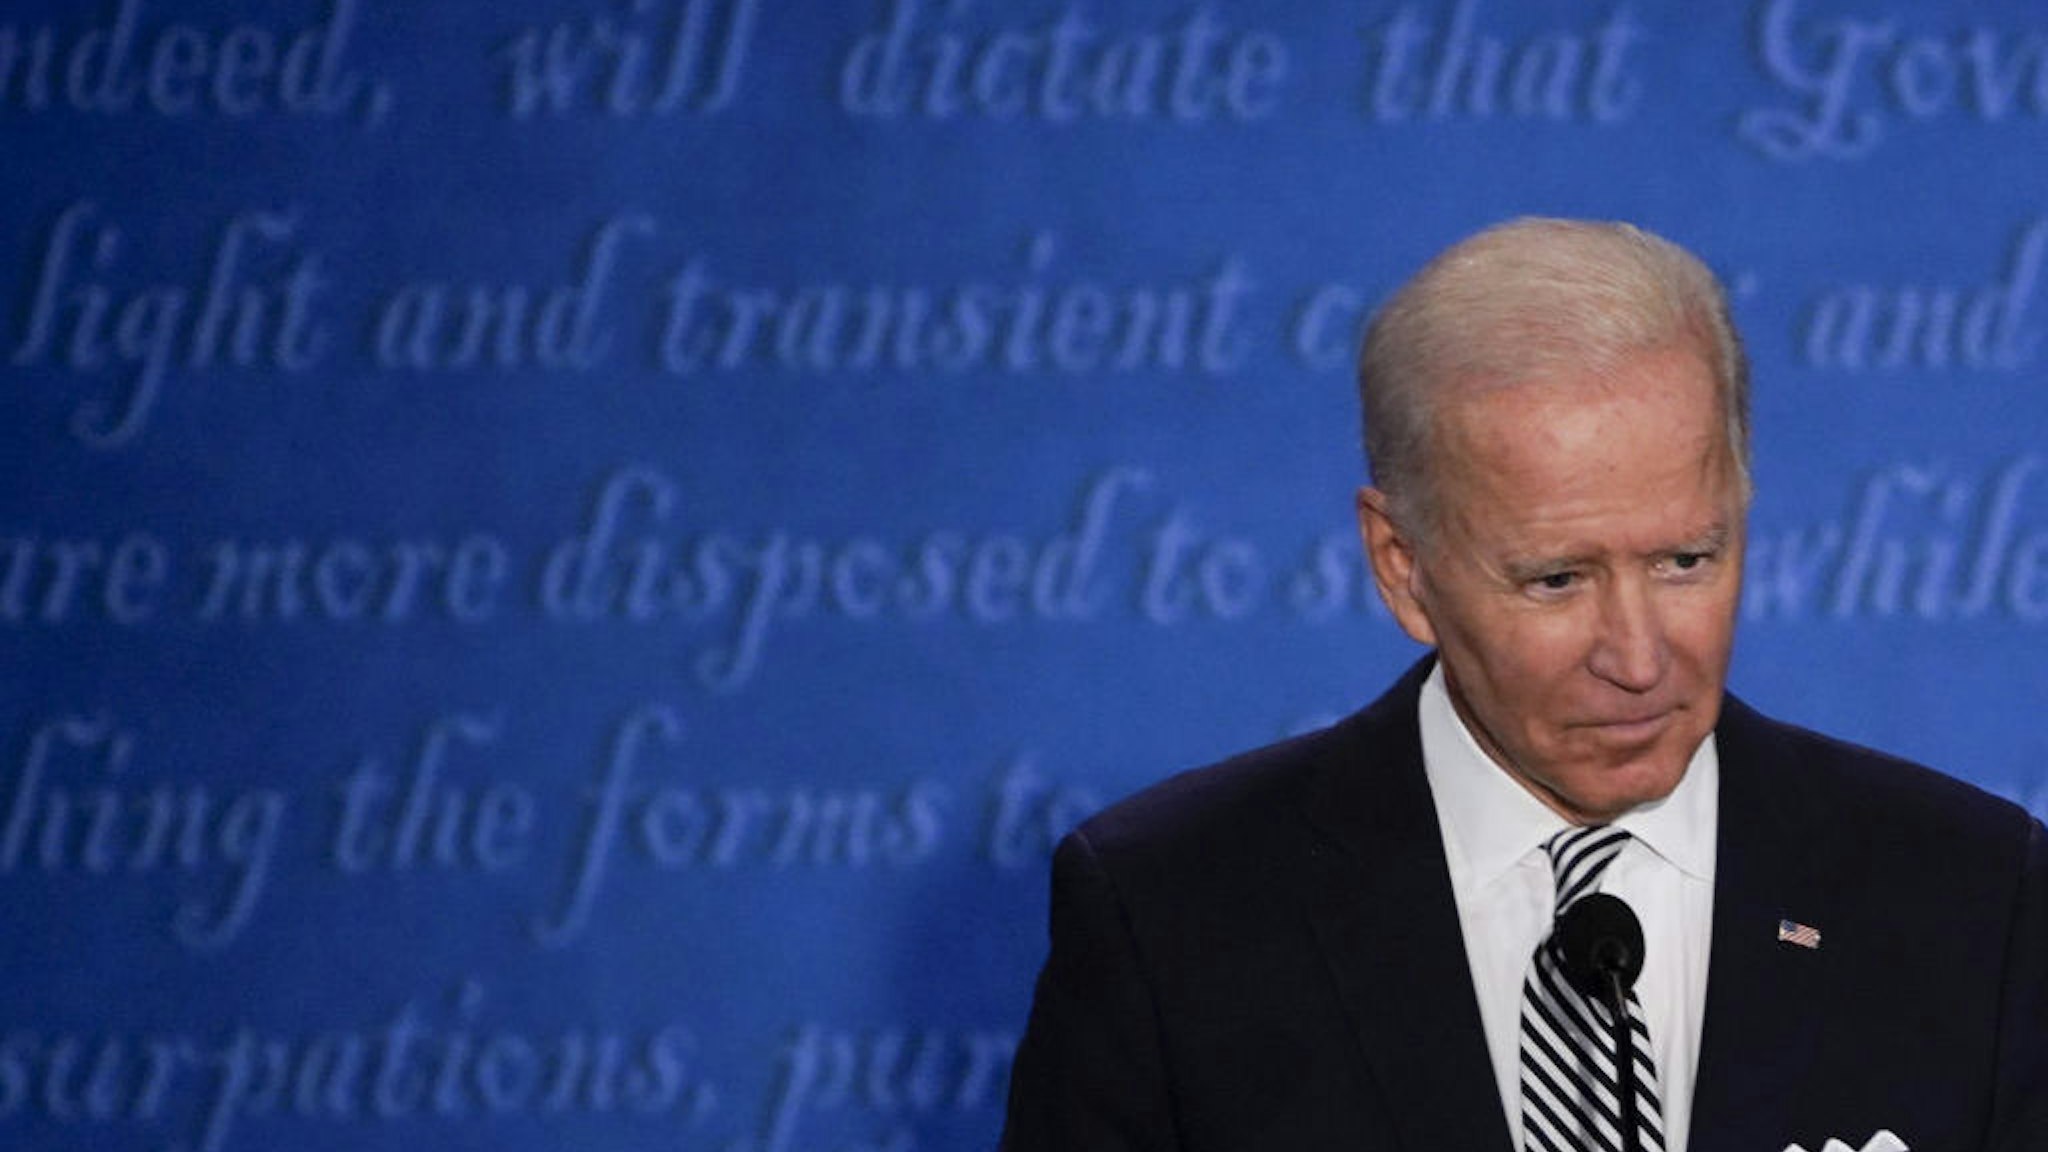 Joe Biden, 2020 Democratic presidential nominee, pauses during the first U.S. presidential debate hosted by Case Western Reserve University and the Cleveland Clinic in Cleveland, Ohio, U.S., on Tuesday, Sept. 29, 2020. Trump and Biden kick off their first debate with contentious topics like the Supreme Court and the coronavirus pandemic suddenly joined by yet another potentially explosive question -- whether the president ducked paying his taxes. Photographer: Matthew Hatcher/Bloomberg